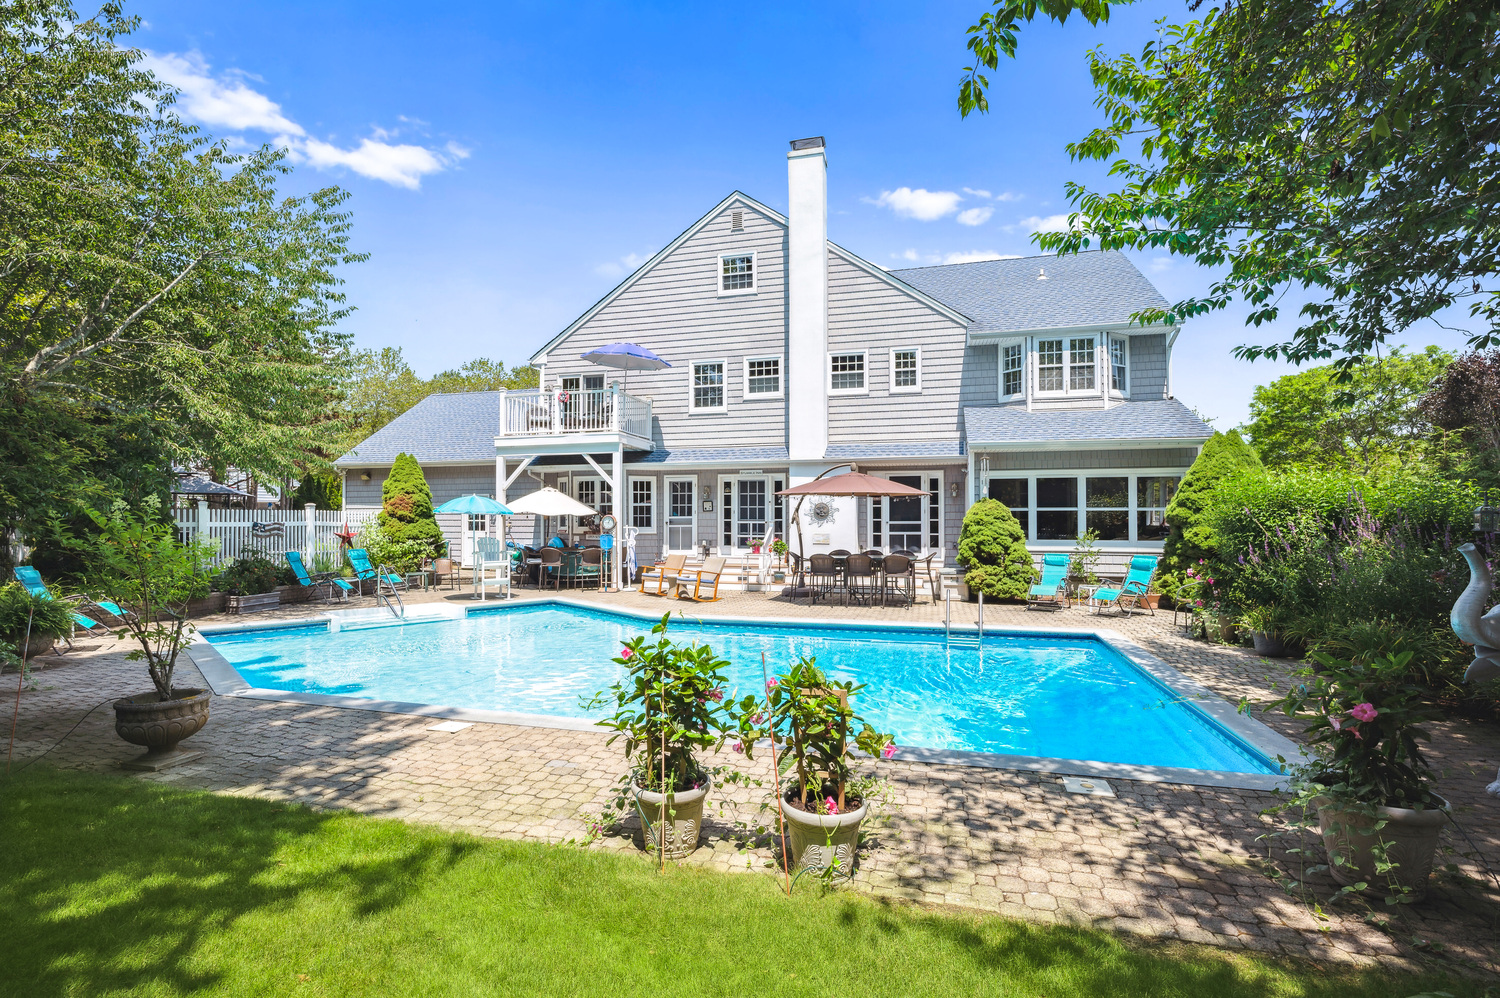 126 Coopers Farm Road, Southampton, sold for $4.15 million. MEDIA HAMPTONS/THE CORCORAN GROUP